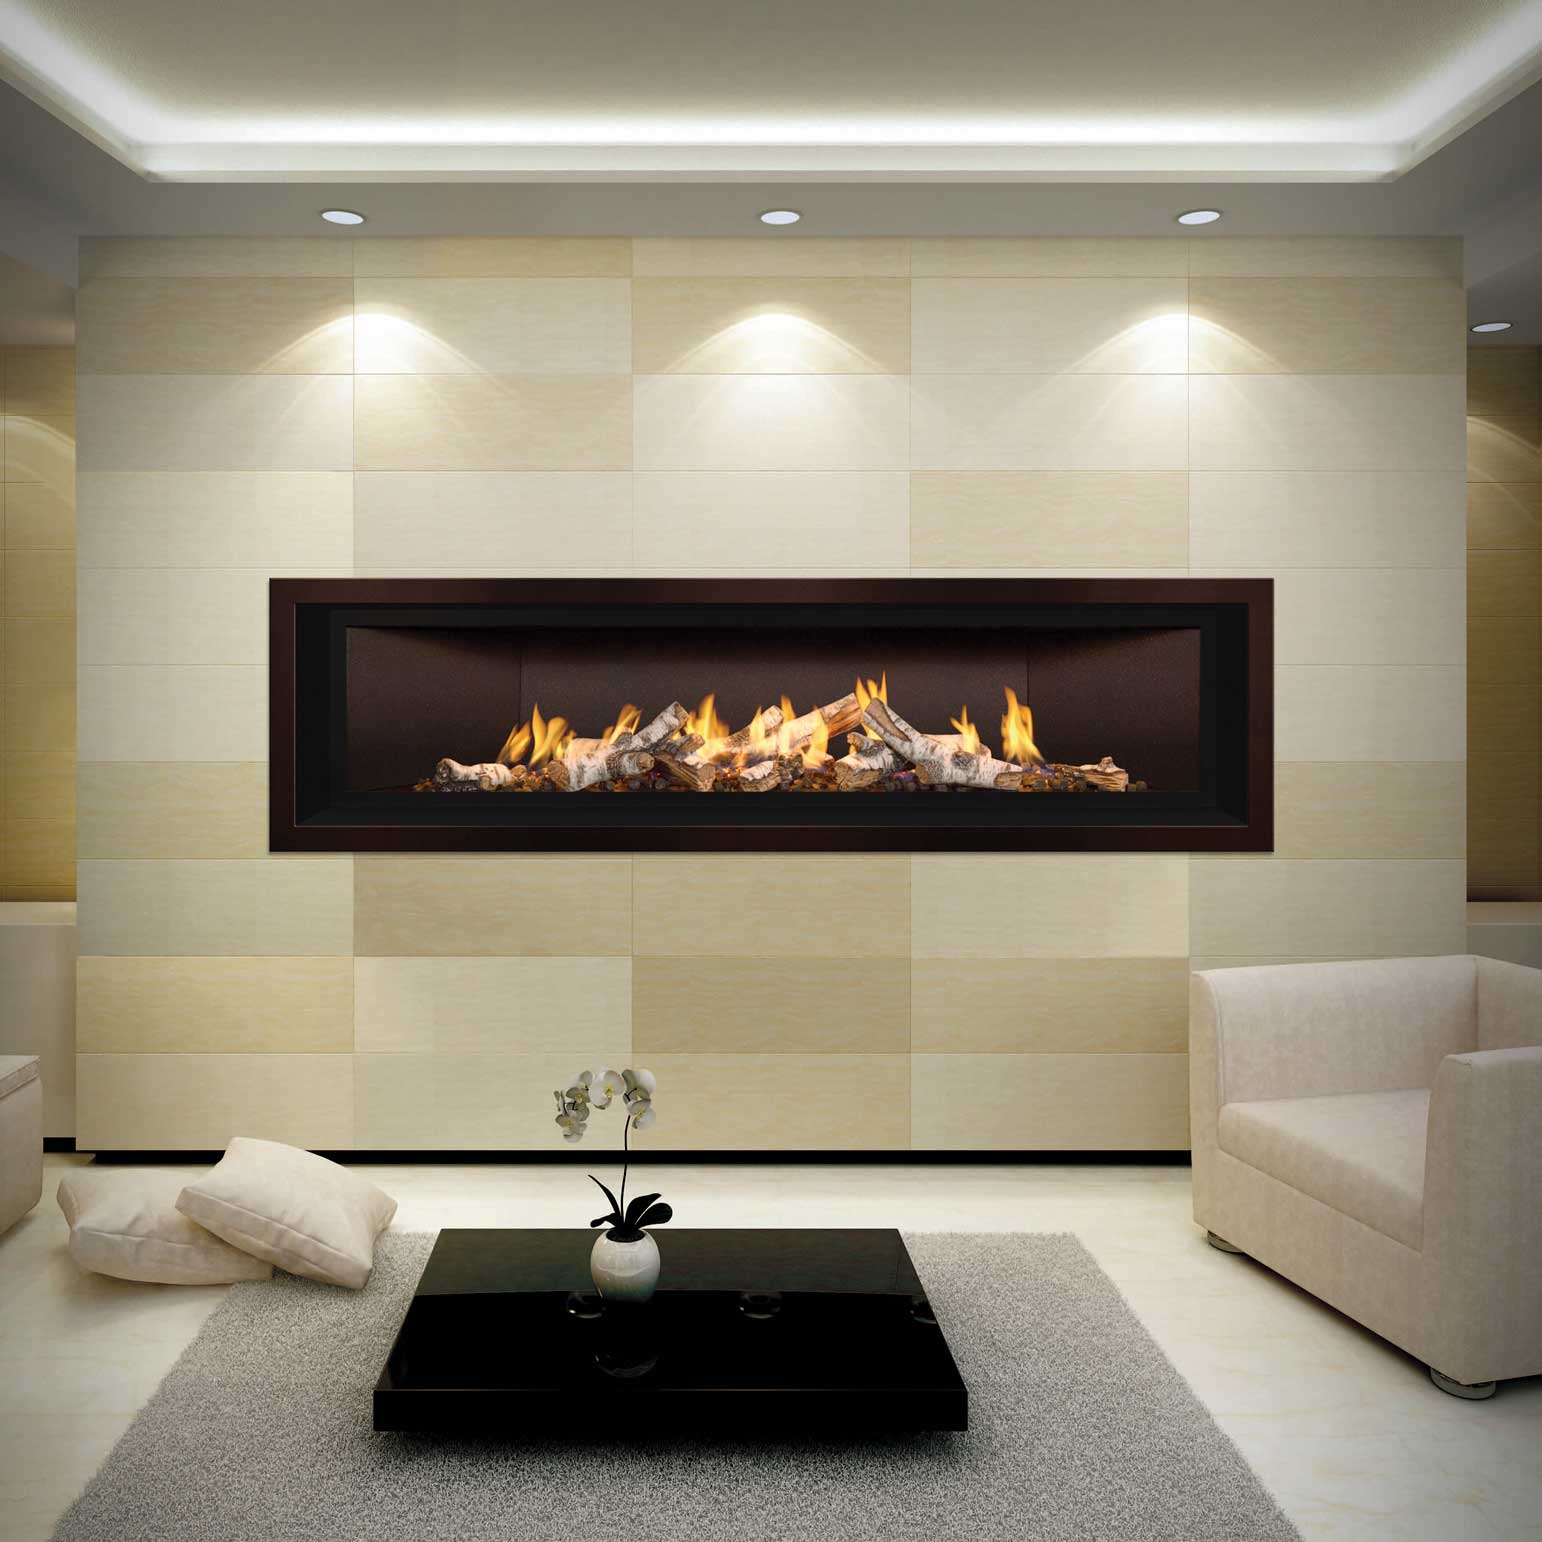 Mendota modern gas fireplace with lights shining down on the fireplace with white chair and black coffee table